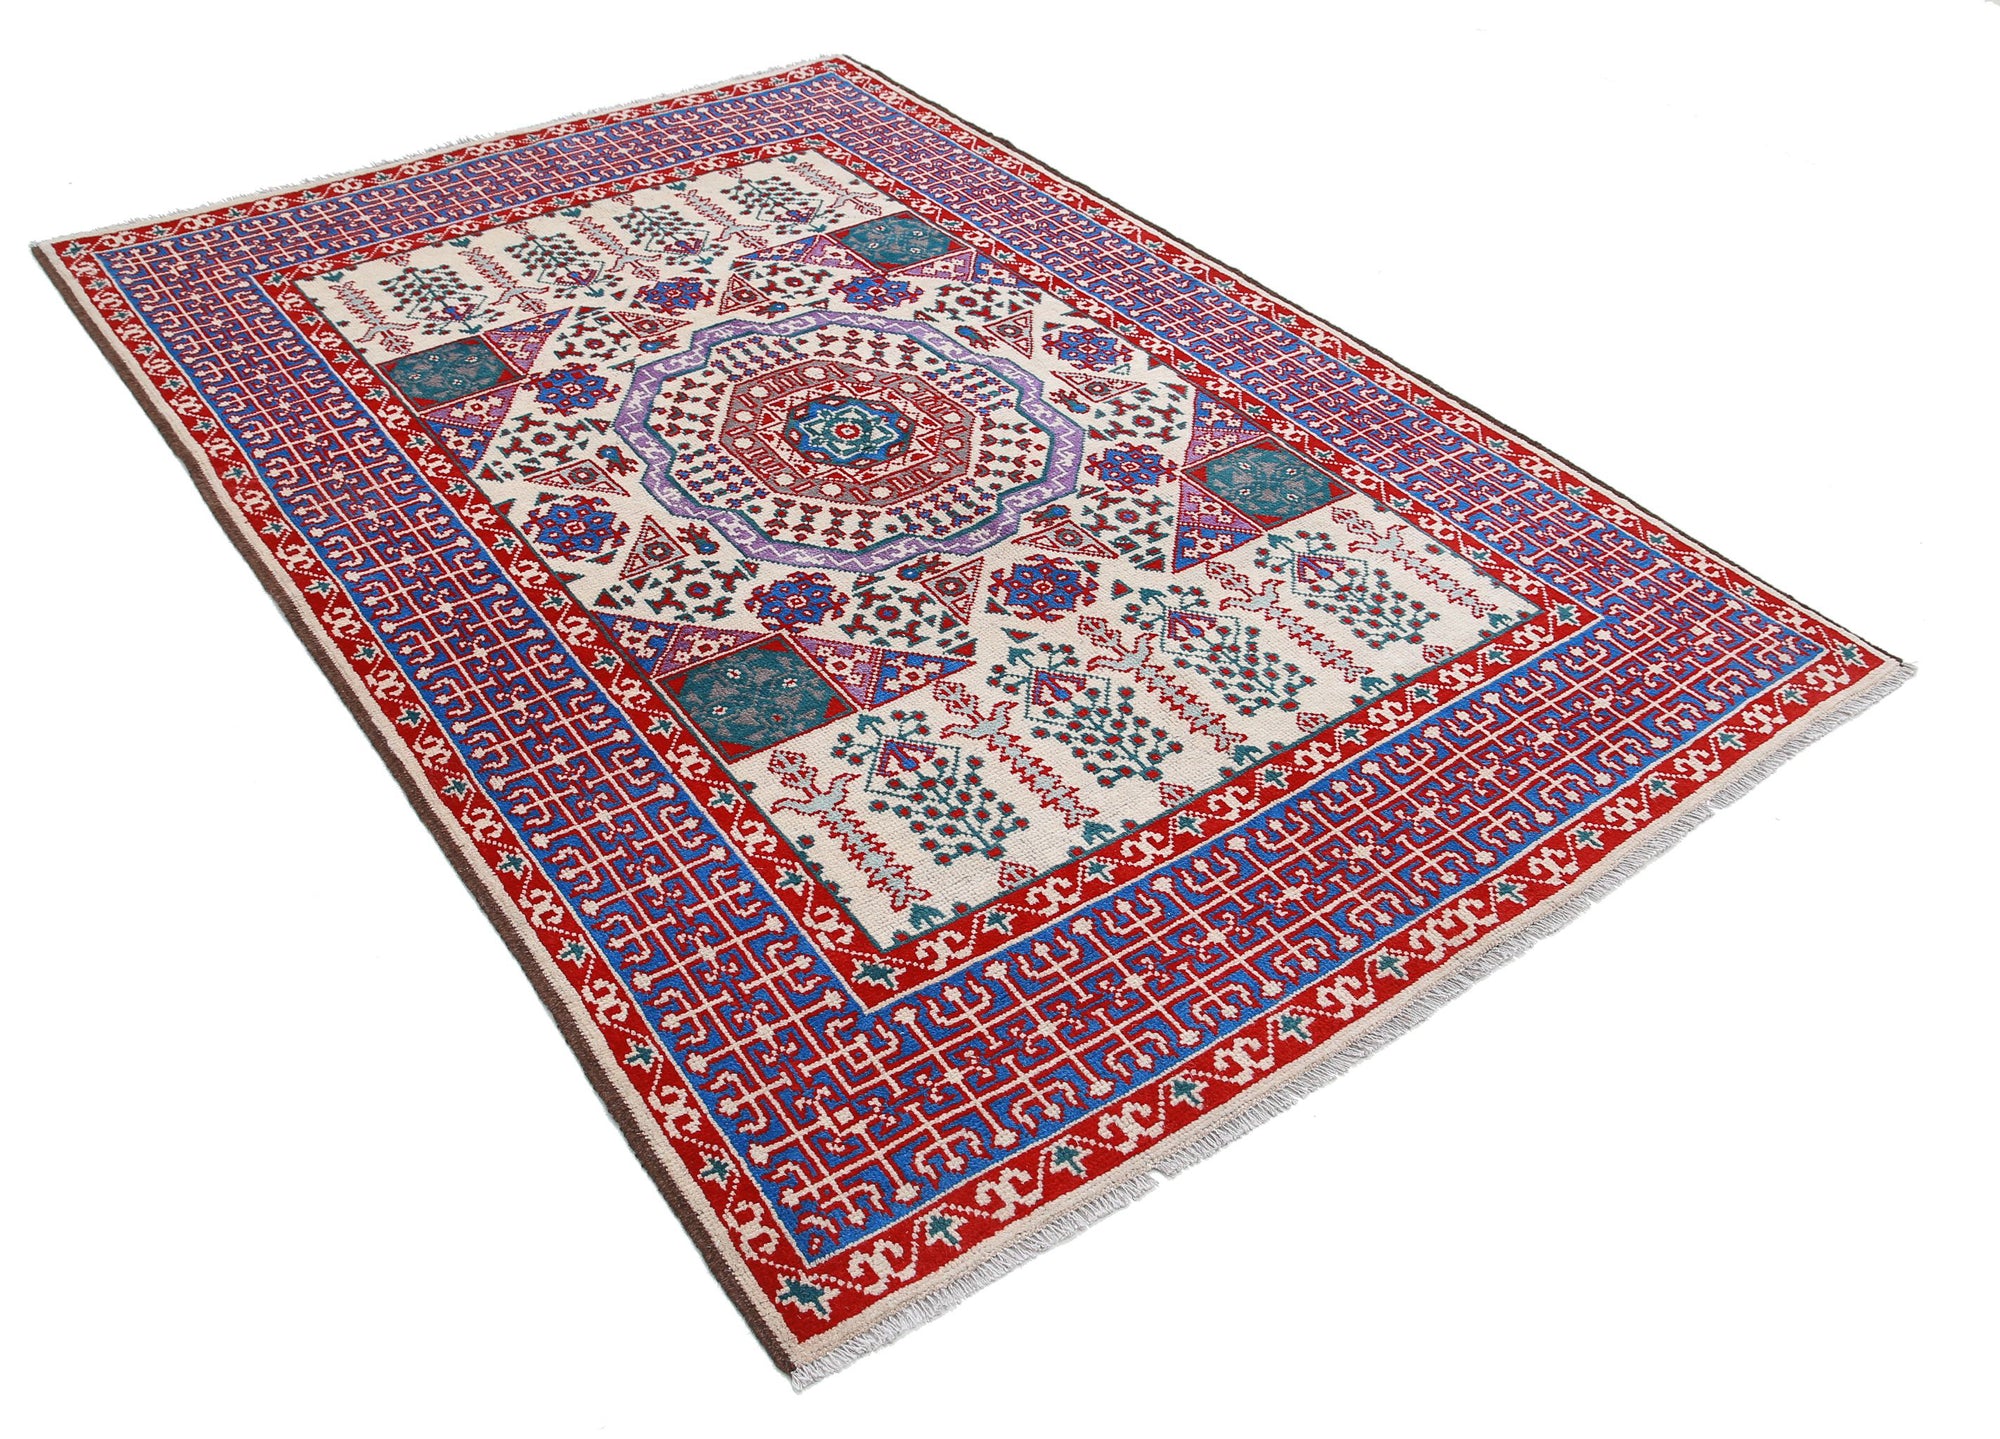 Revival-hand-knotted-qarghani-wool-rug-5014226-1.jpg